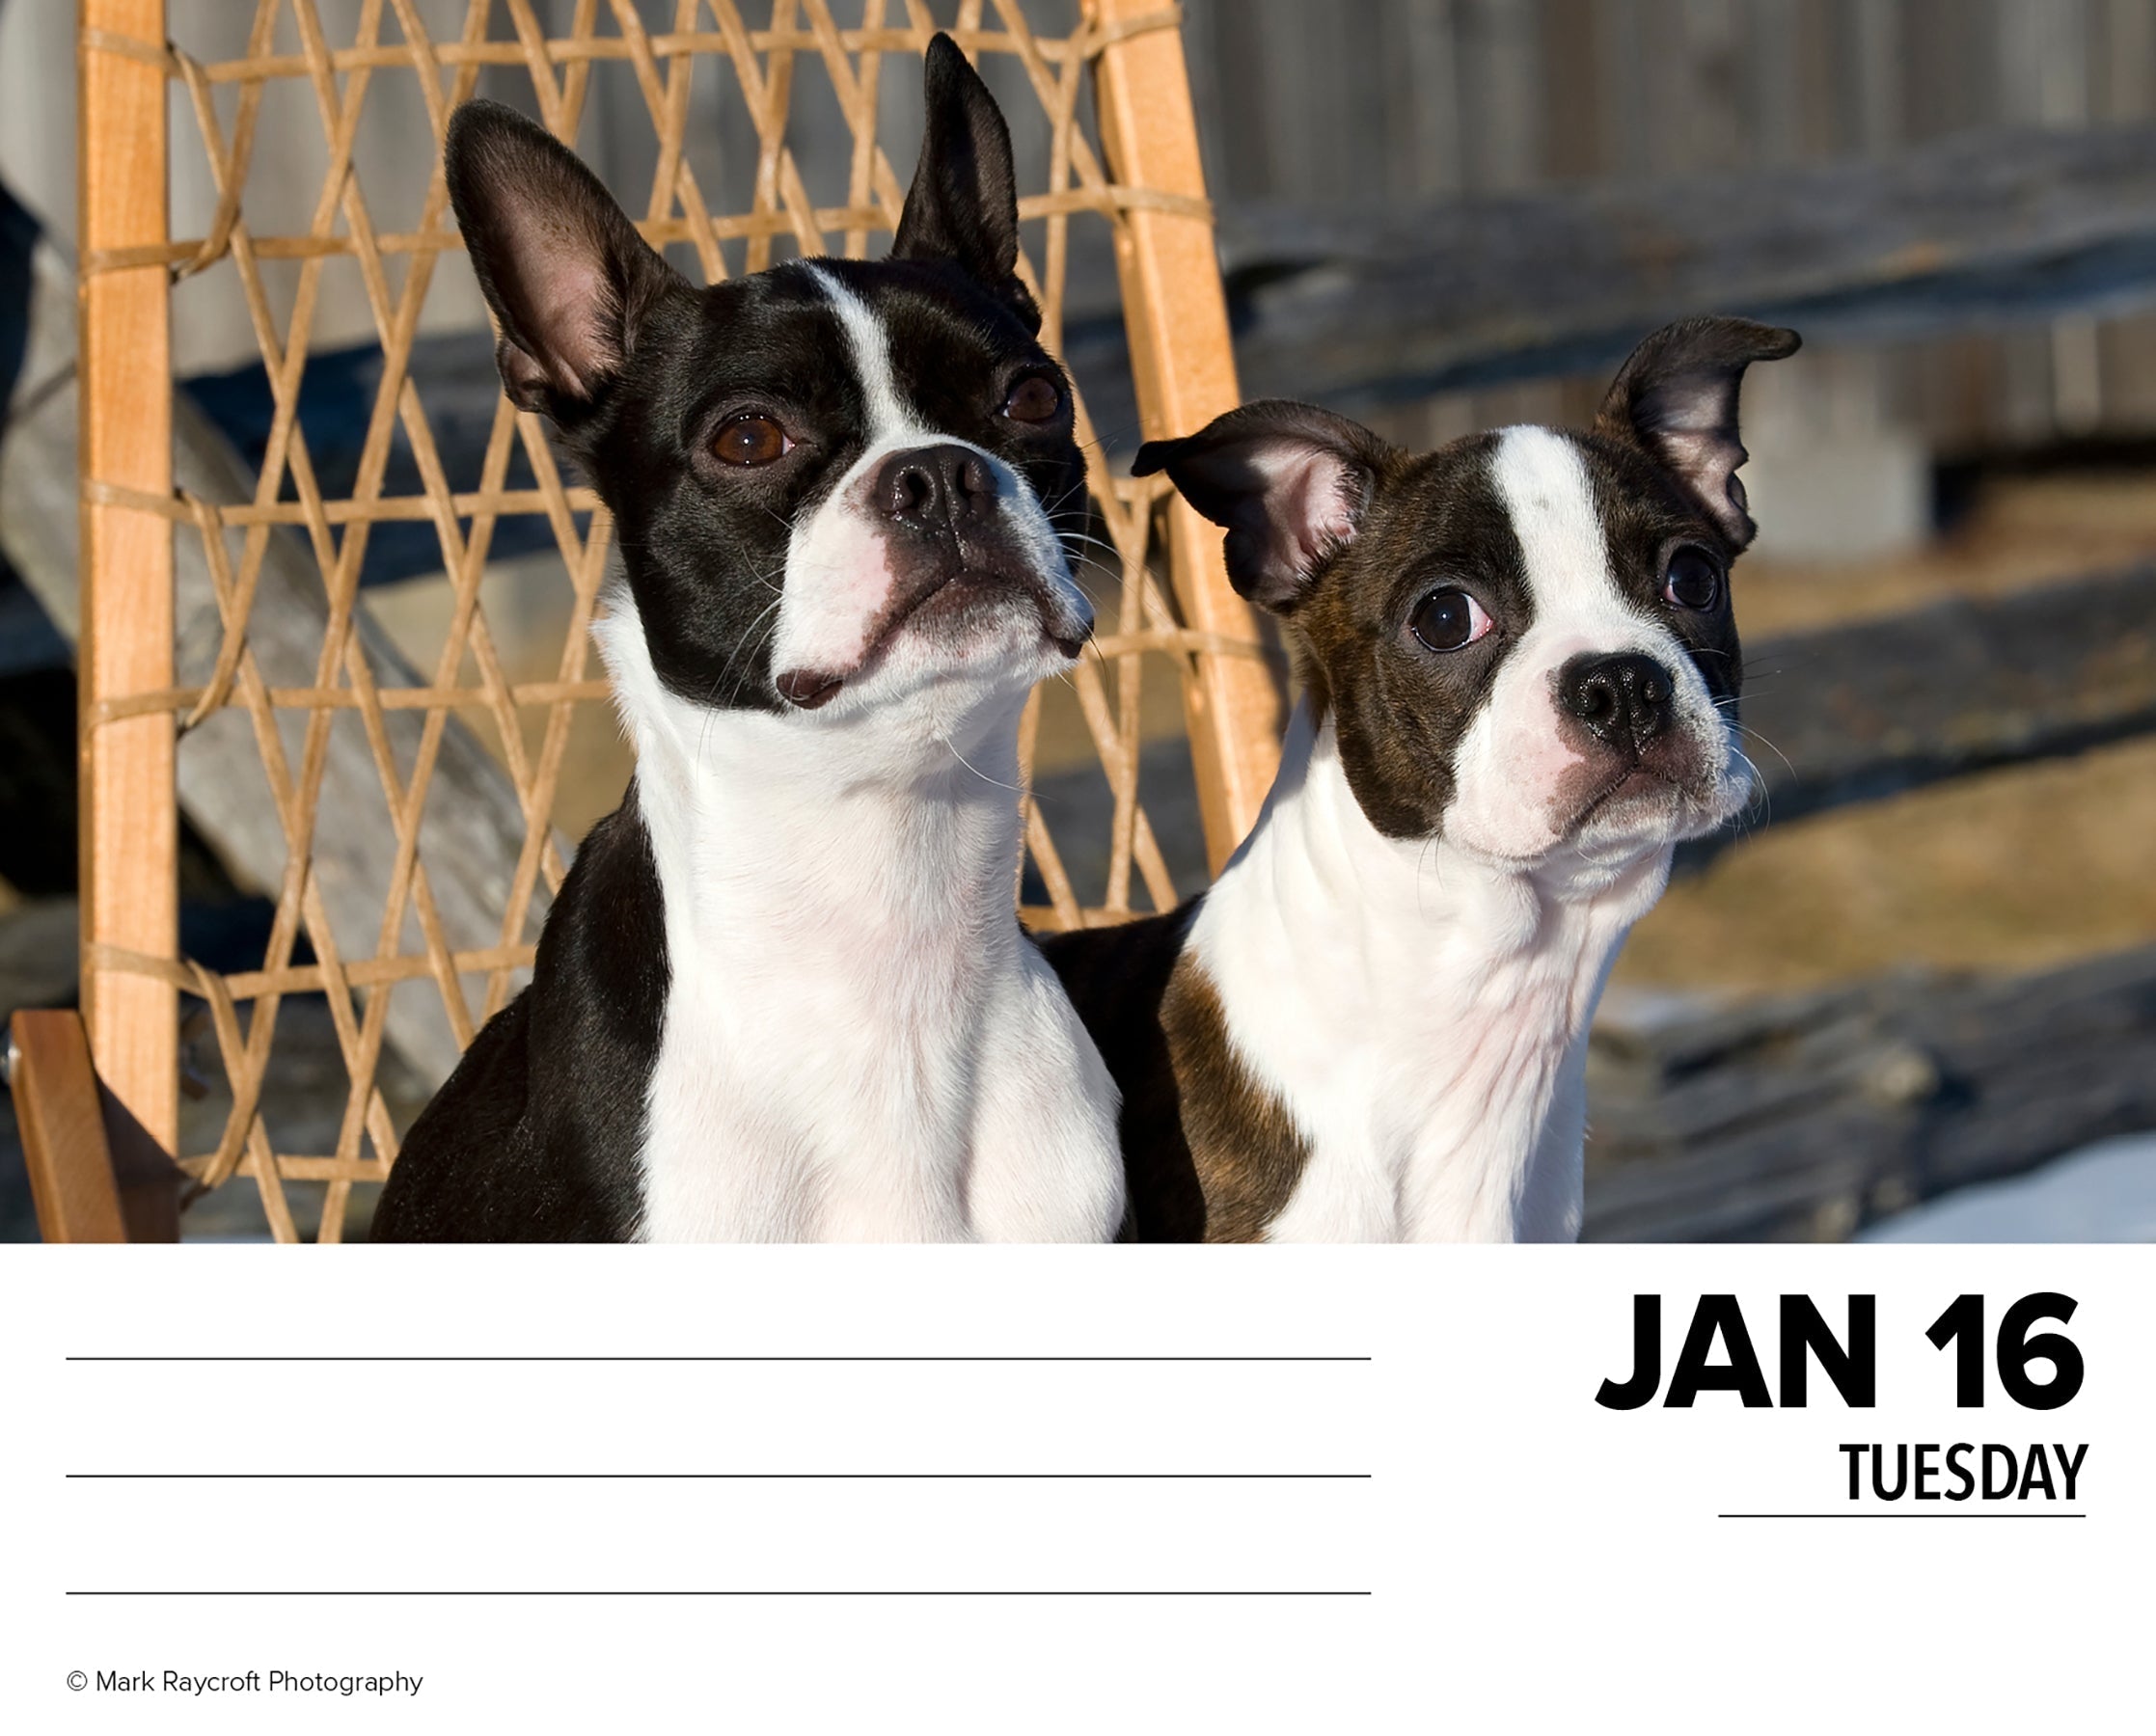 2024 Boston Terriers - Boxed Page A Day Calendar